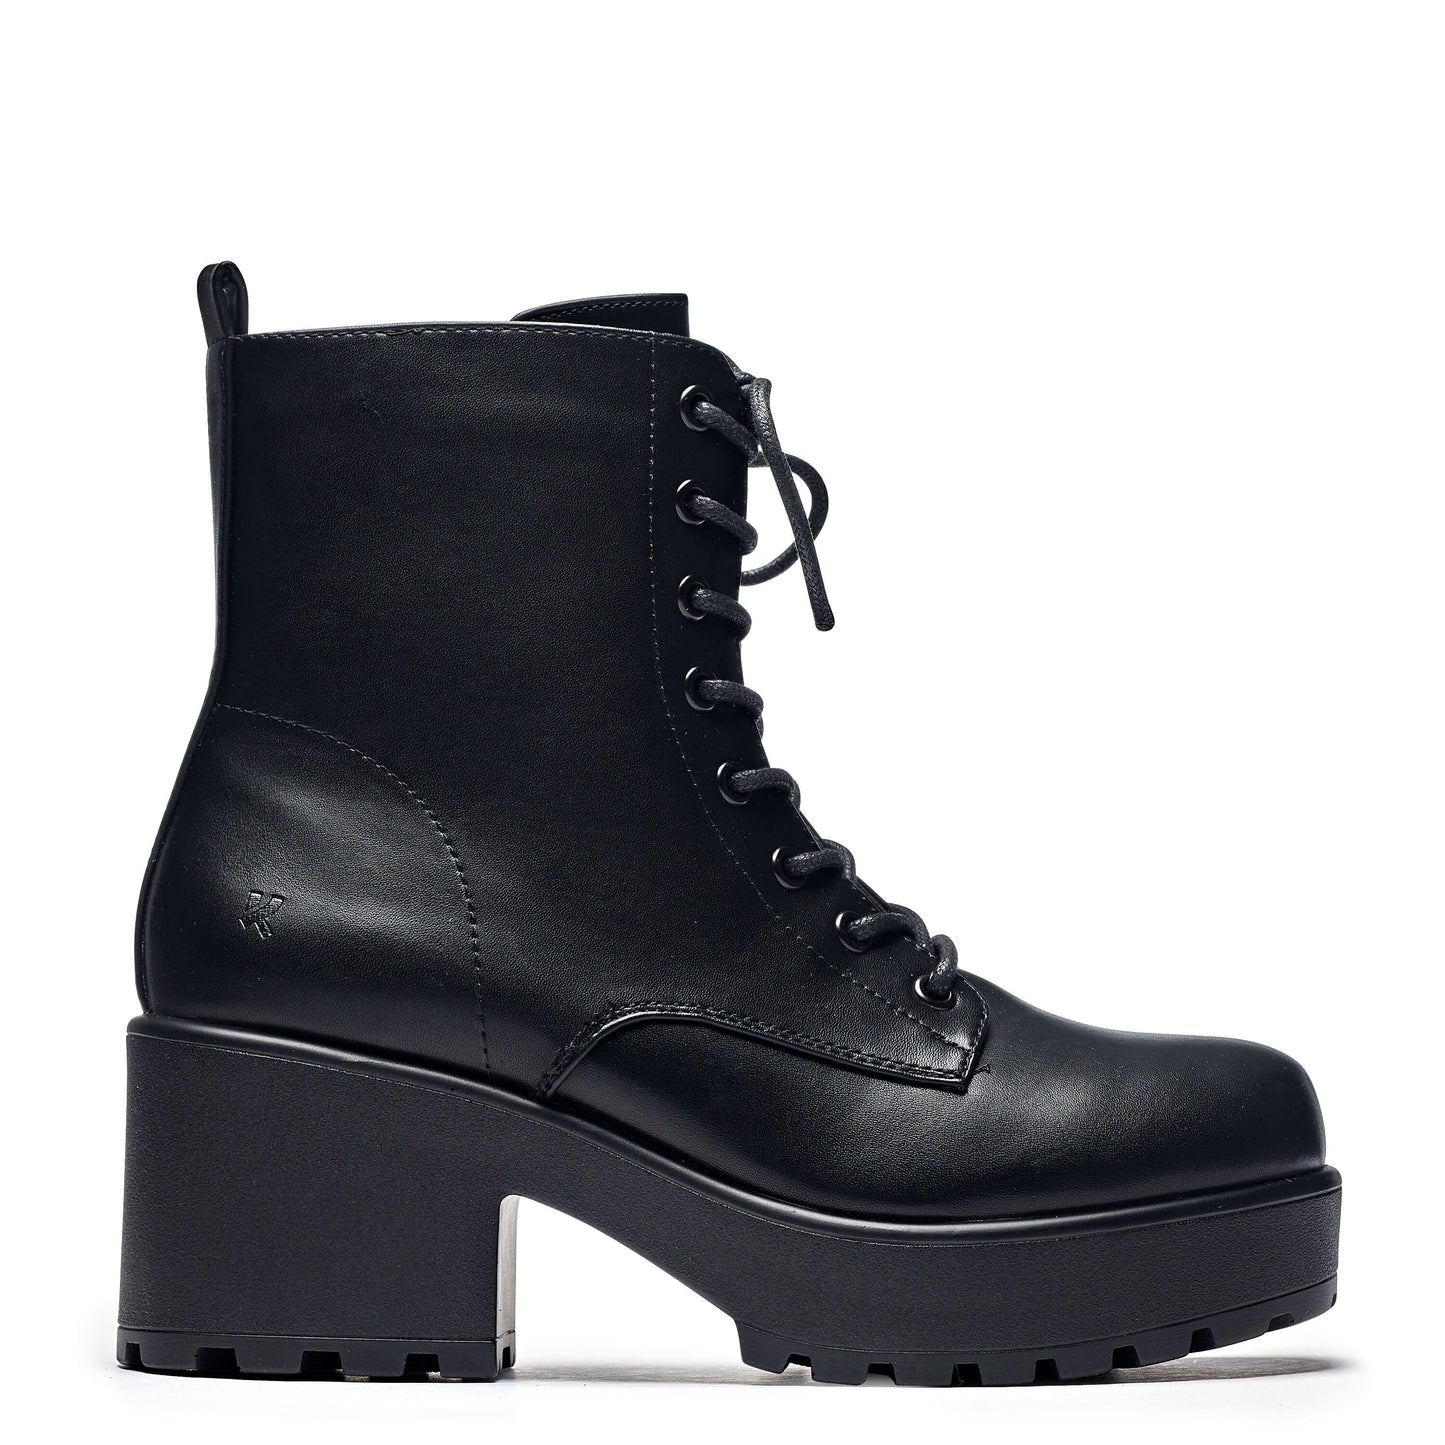 GIN Platform Military Boots - Ankle Boots - KOI Footwear - Black - Main View